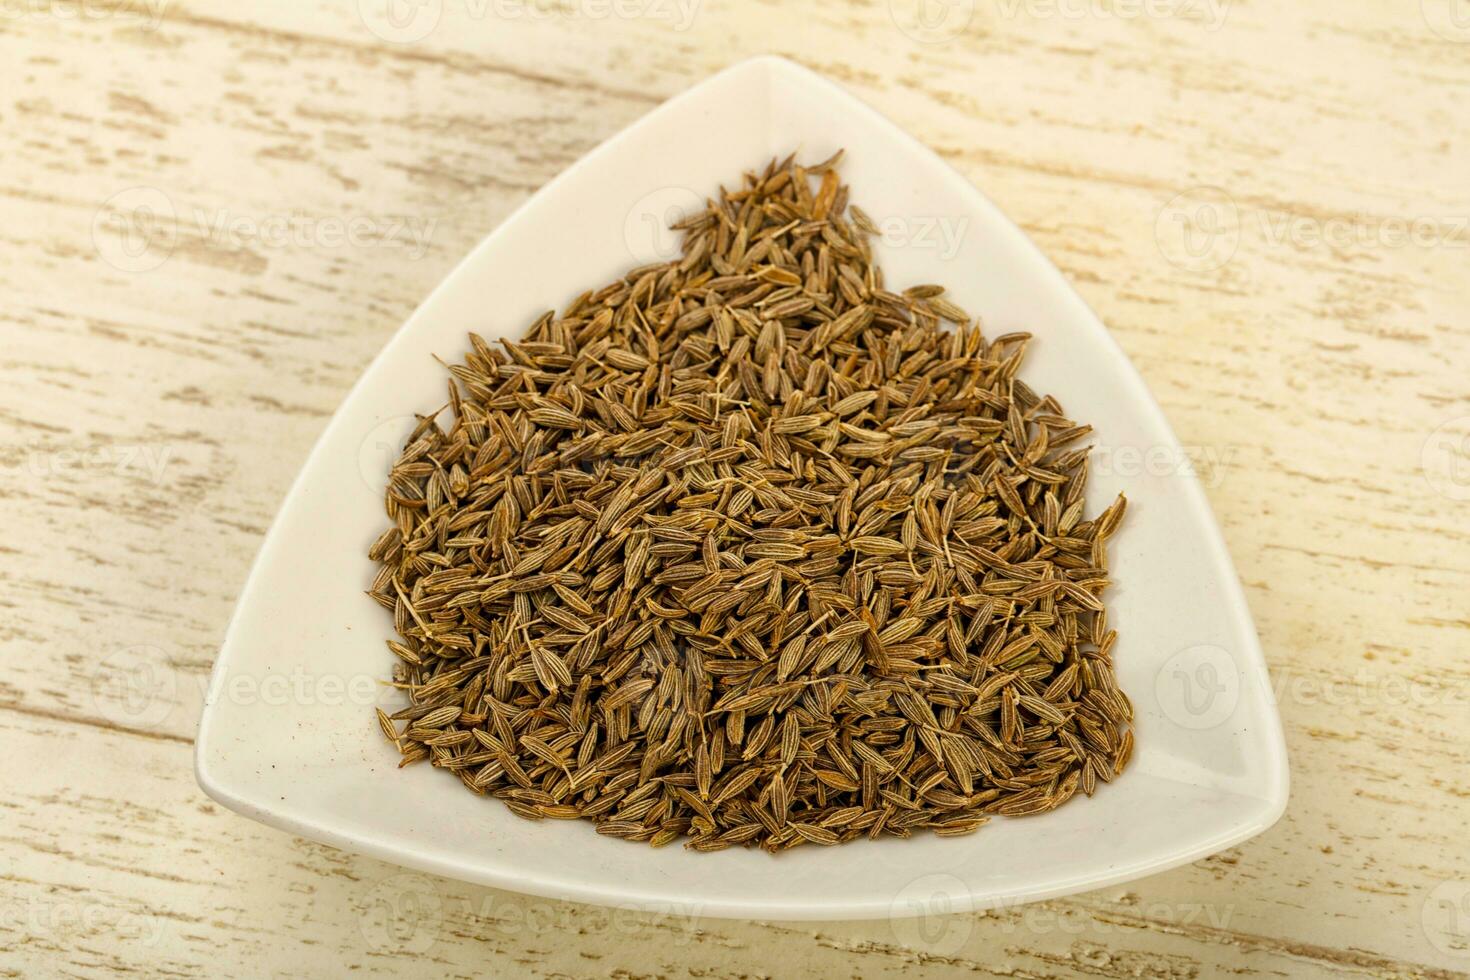 Cumin seeds over wooden background photo